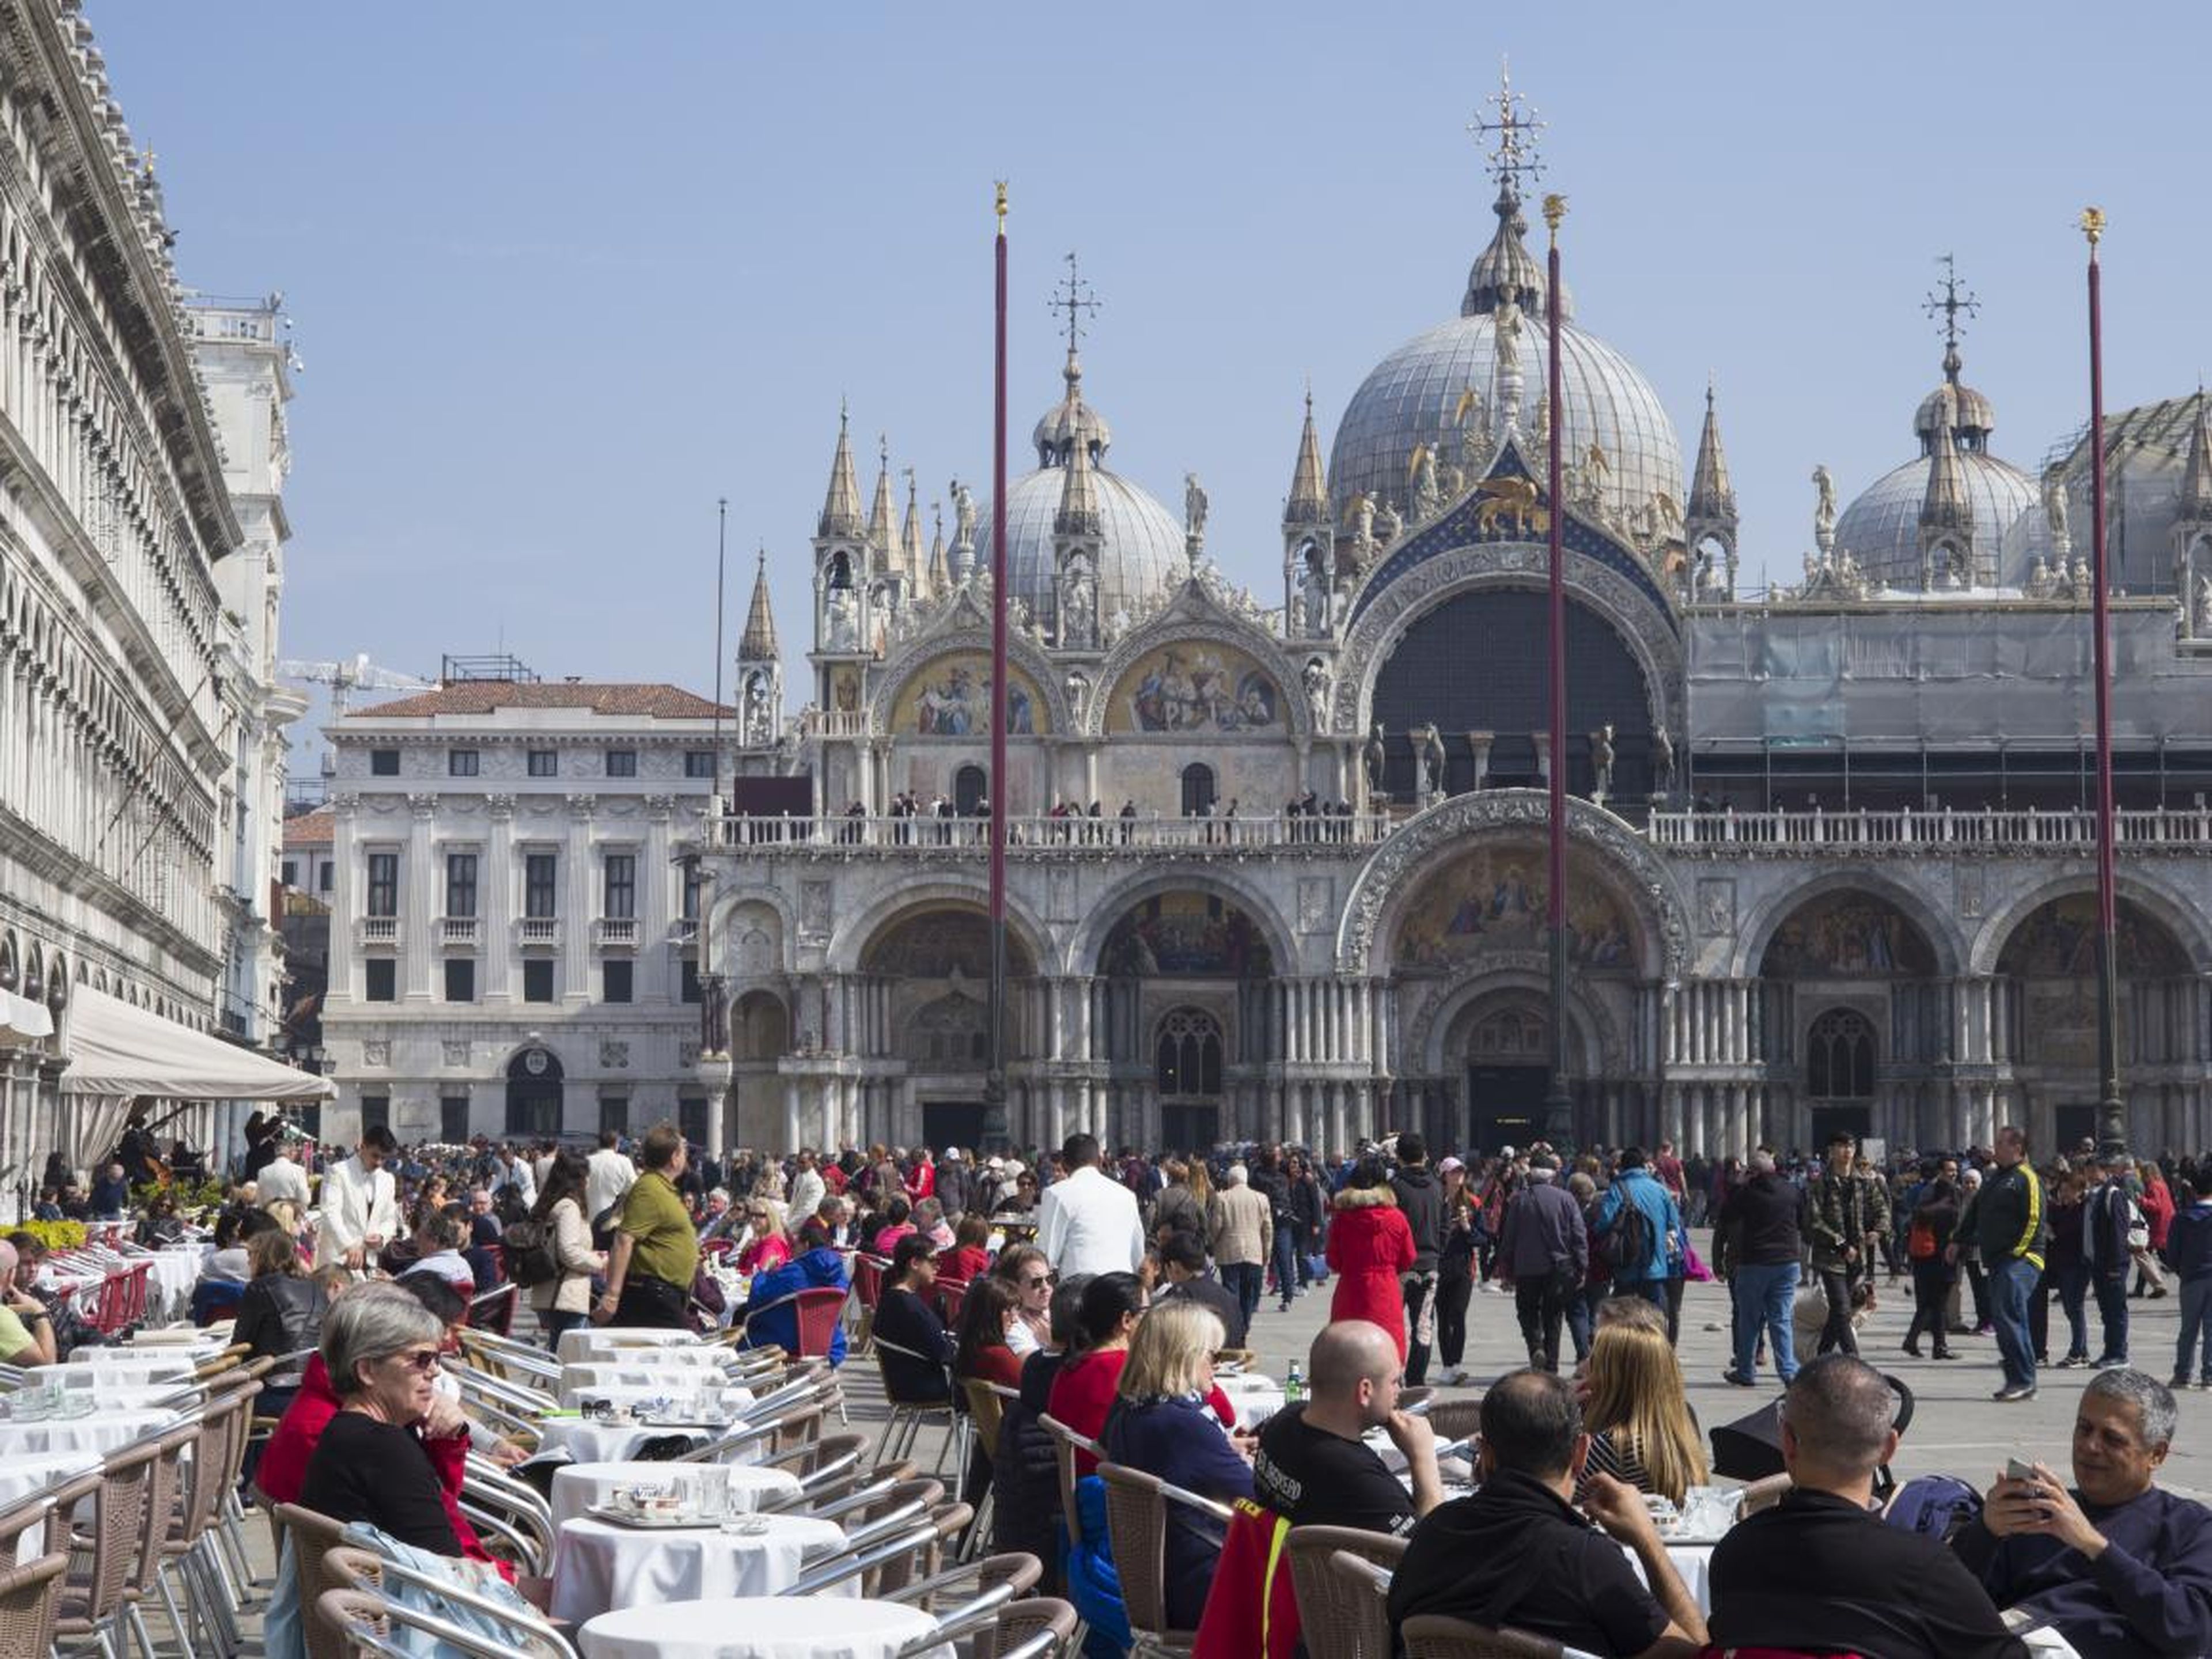 A similar incident occurred in August, when a café customer said he was charged nearly $50 for two coffees and a water. Part of the bill ended up being a surcharge for sitting in the "sunniest" corner of Piazza San Marco.